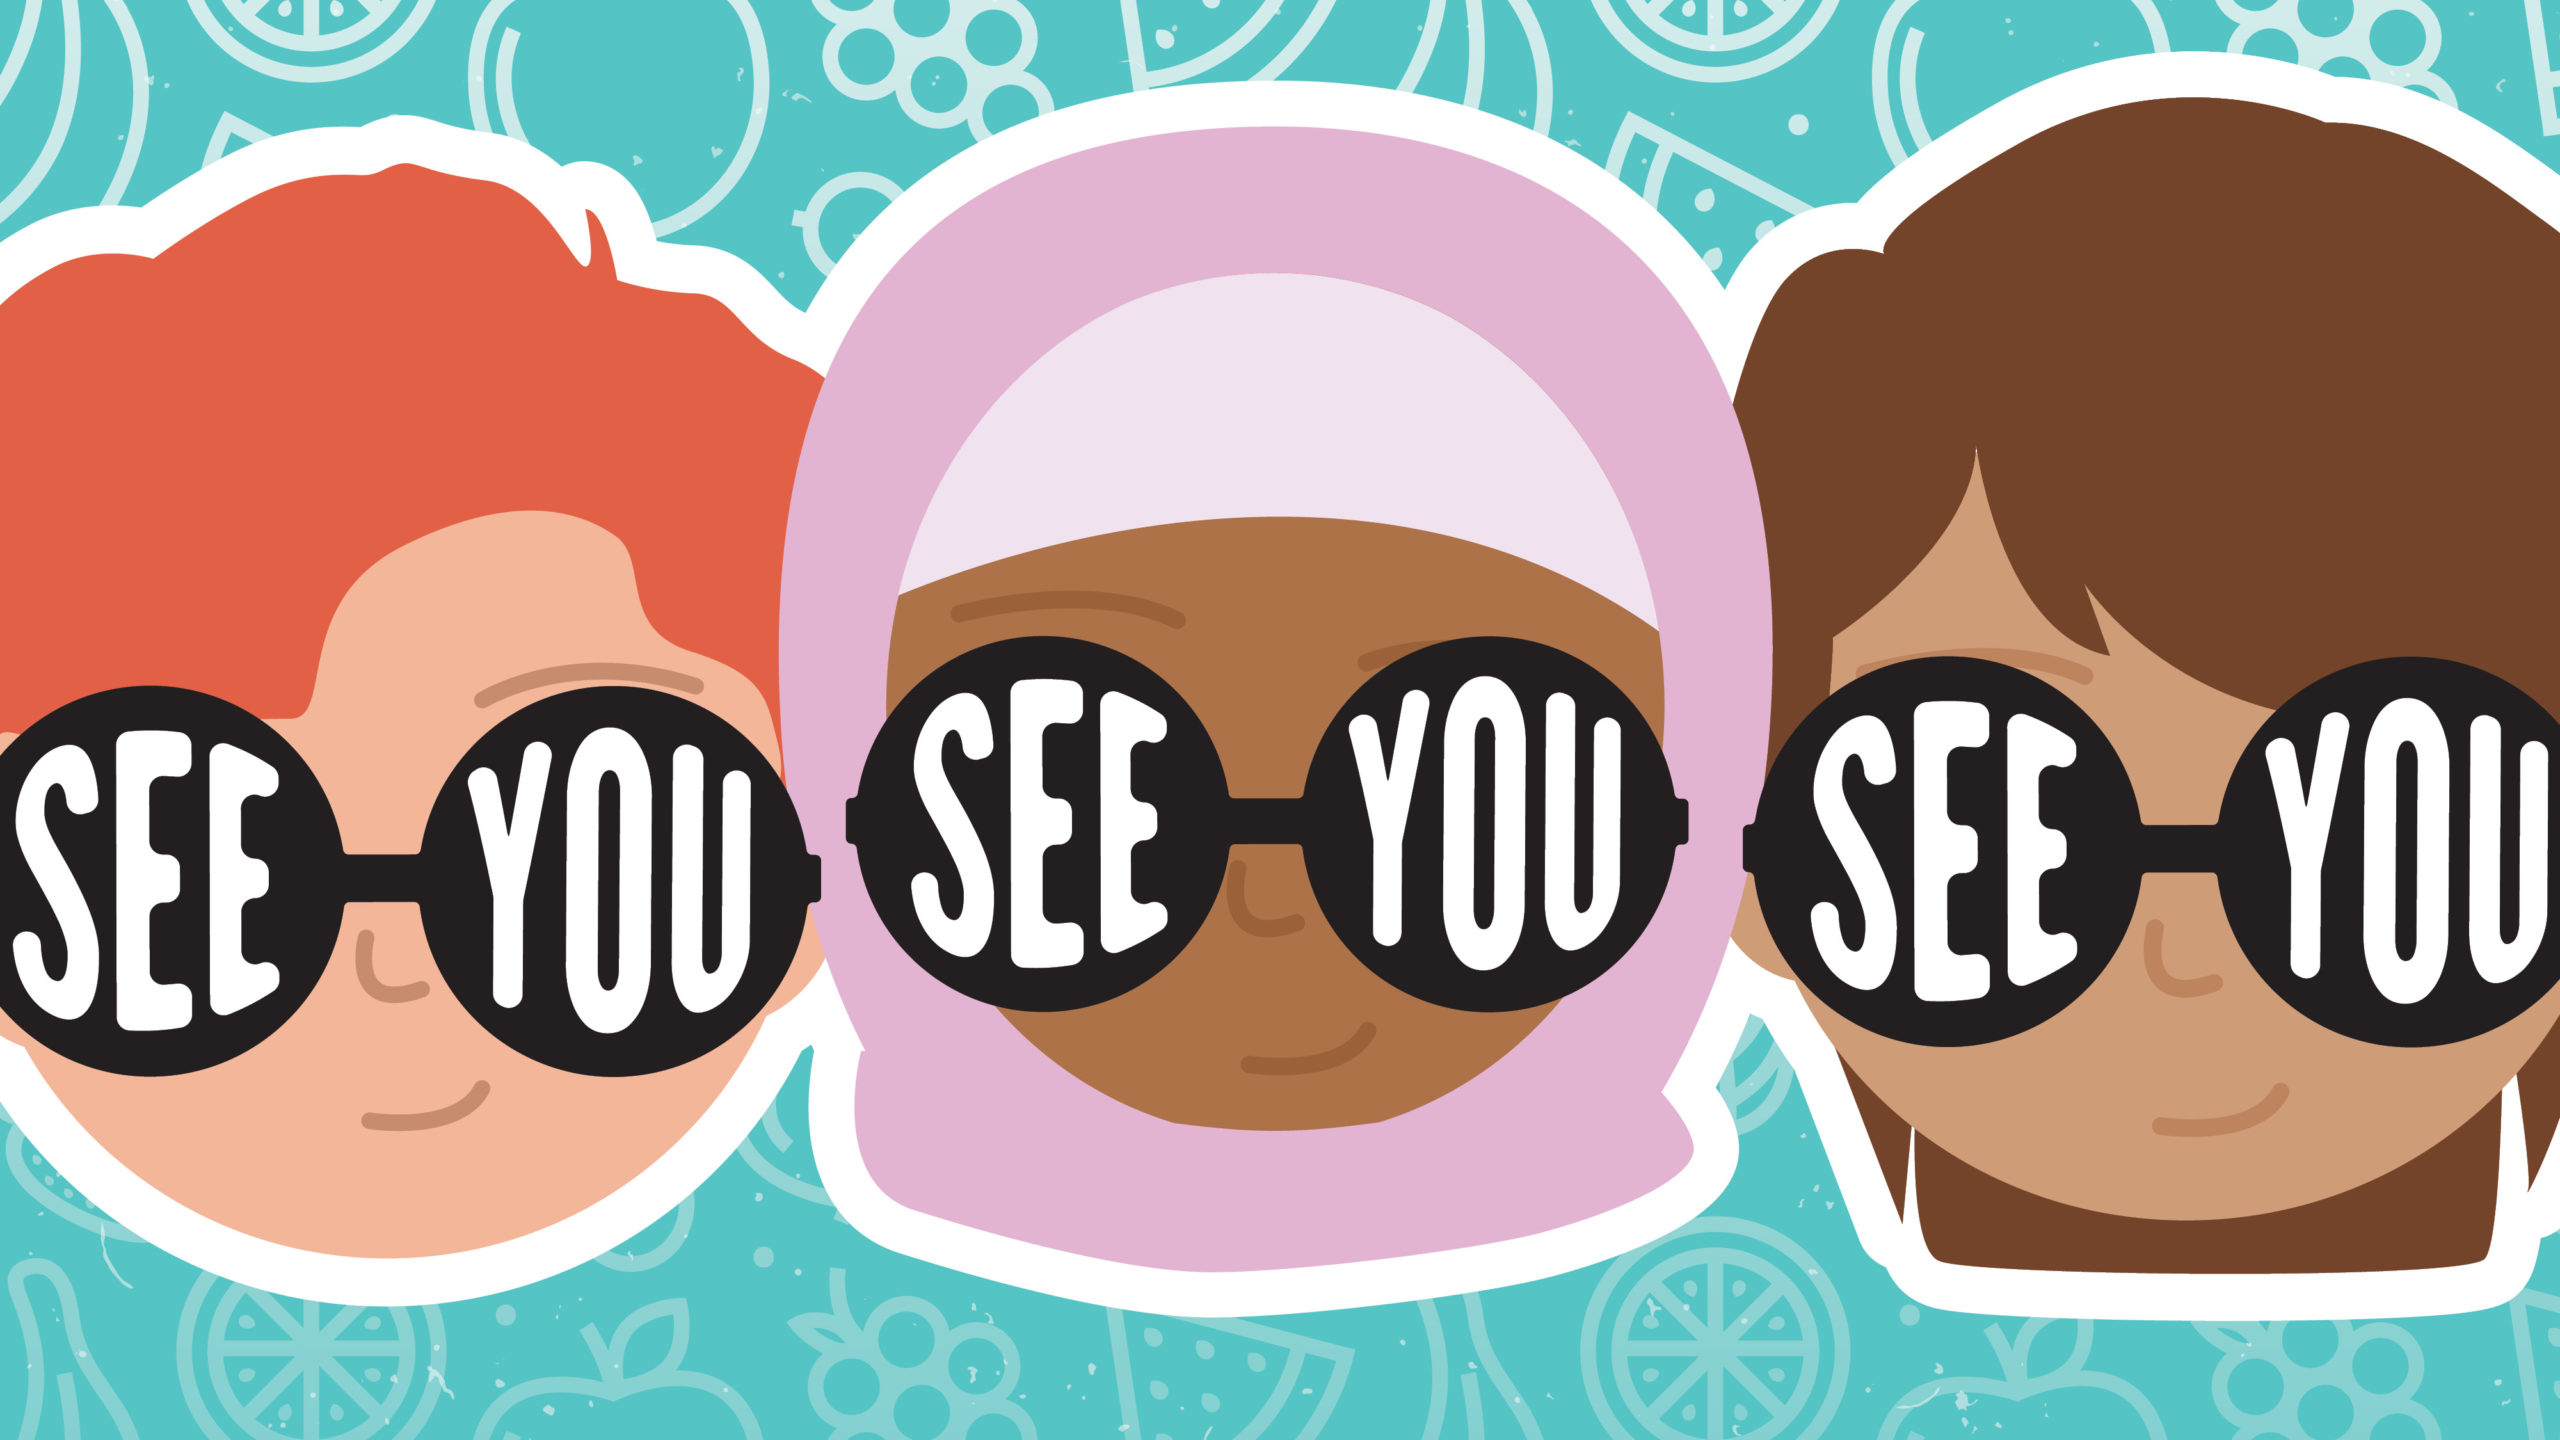 Three cartoon people wearing sunglasses that say "See You" on the lenses